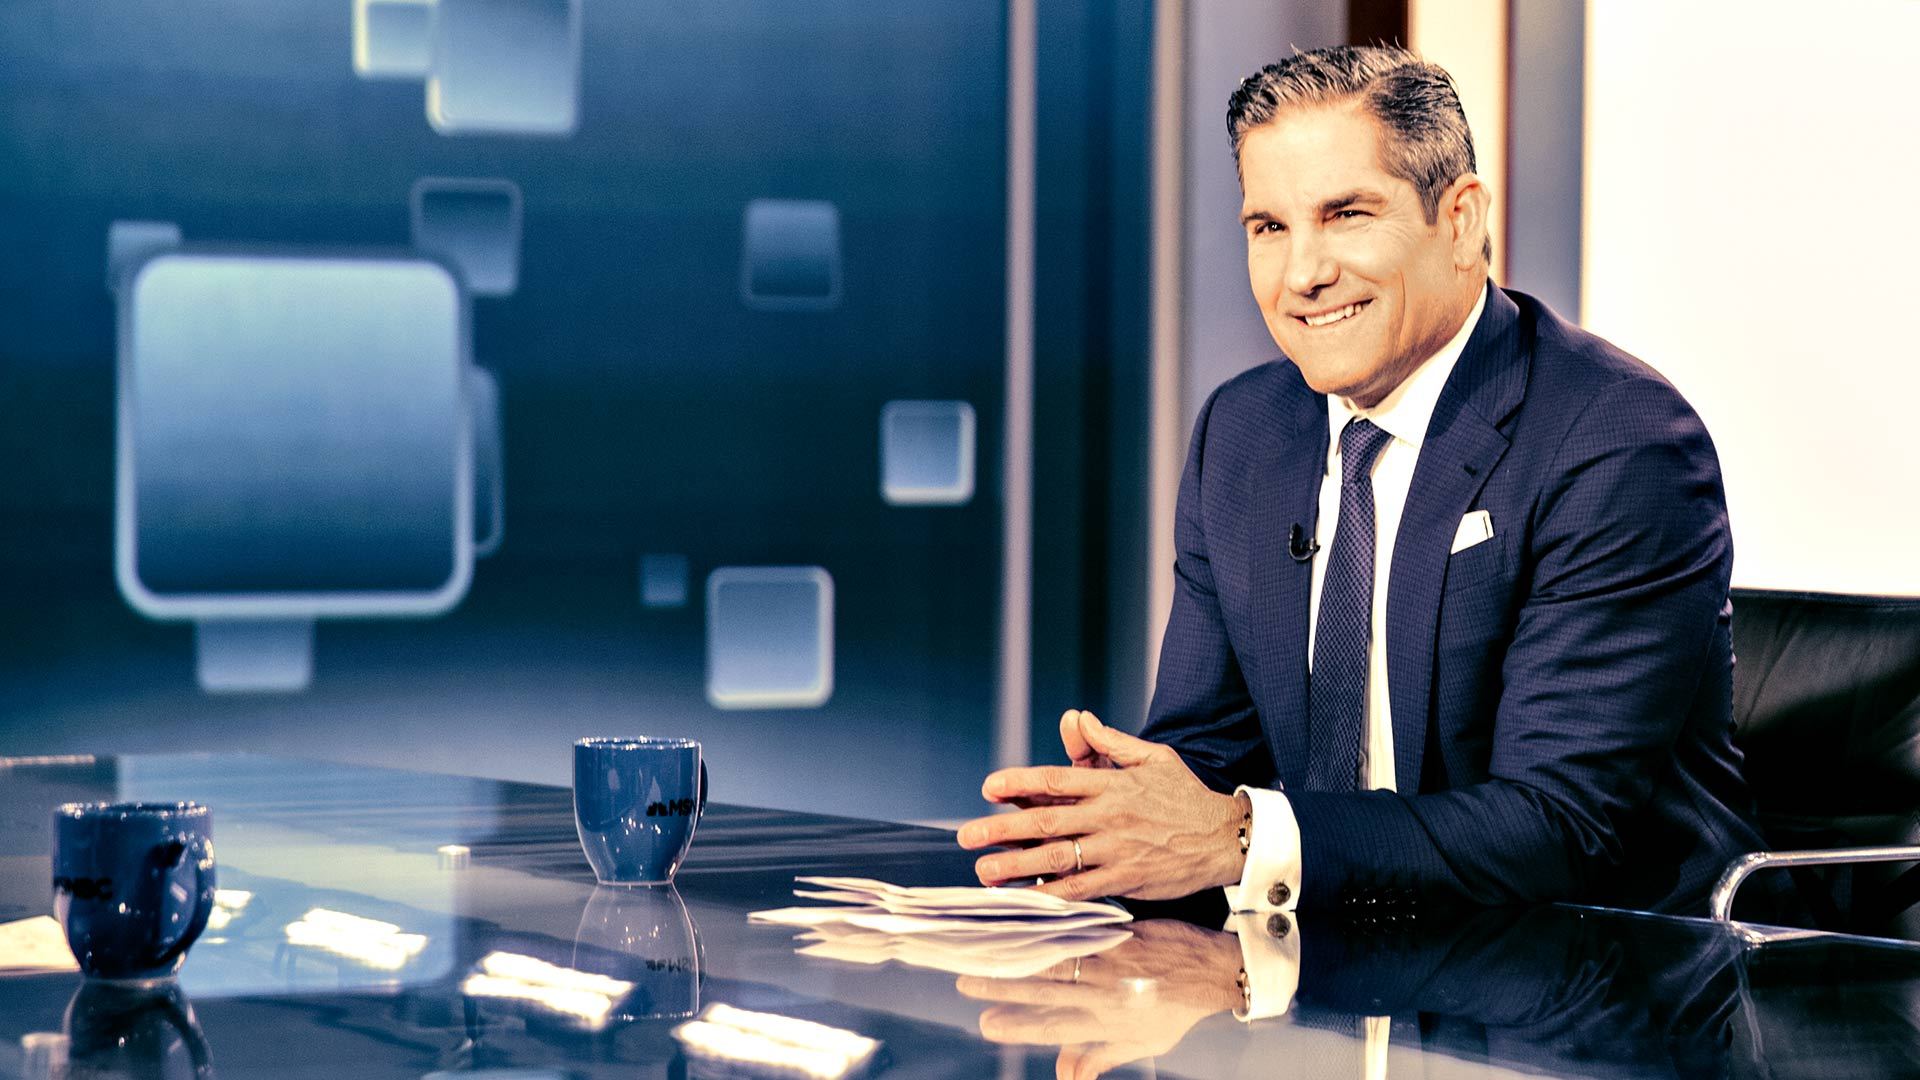 Grant Cardone: Q&A Session With The Master